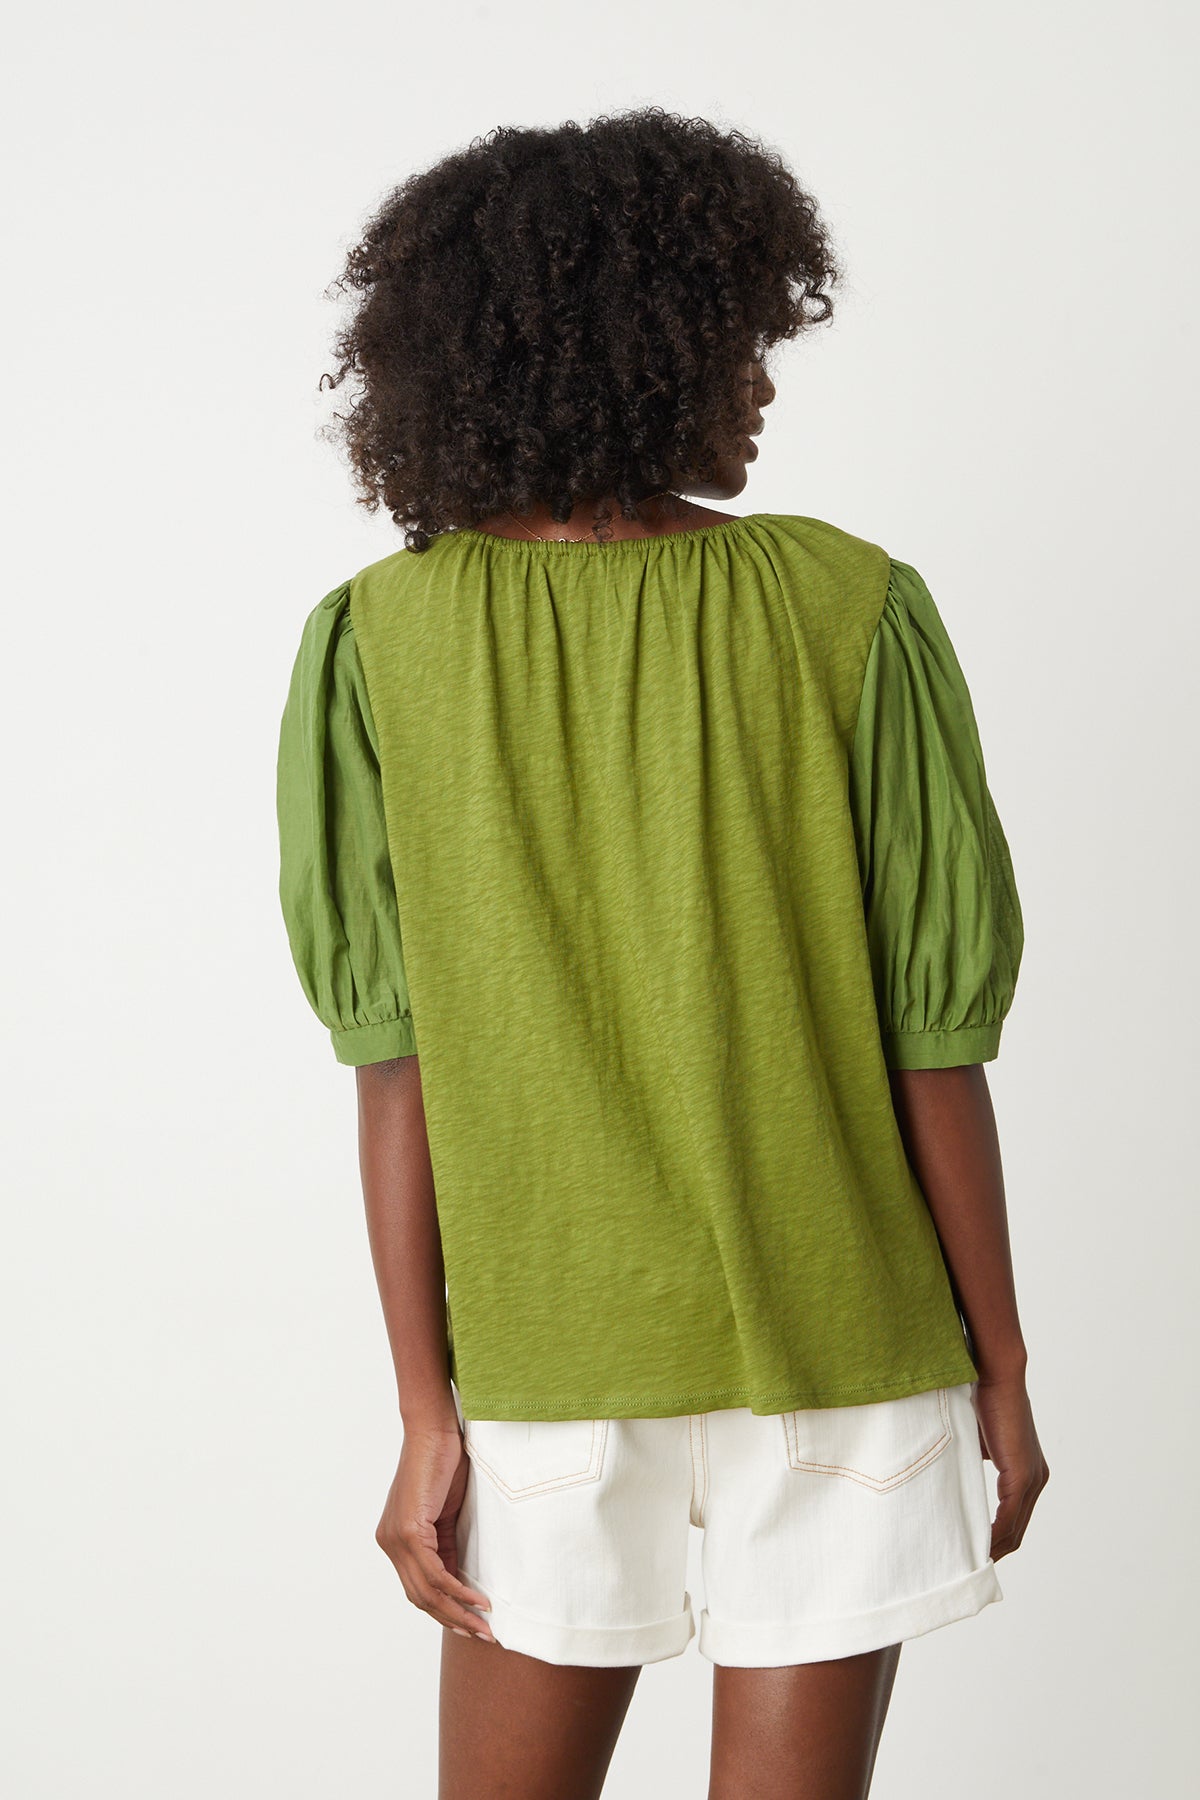   Woman sitting on stool in studio wearing Mallory Top in moss green with puff sleeves paired with white denim shorts back 